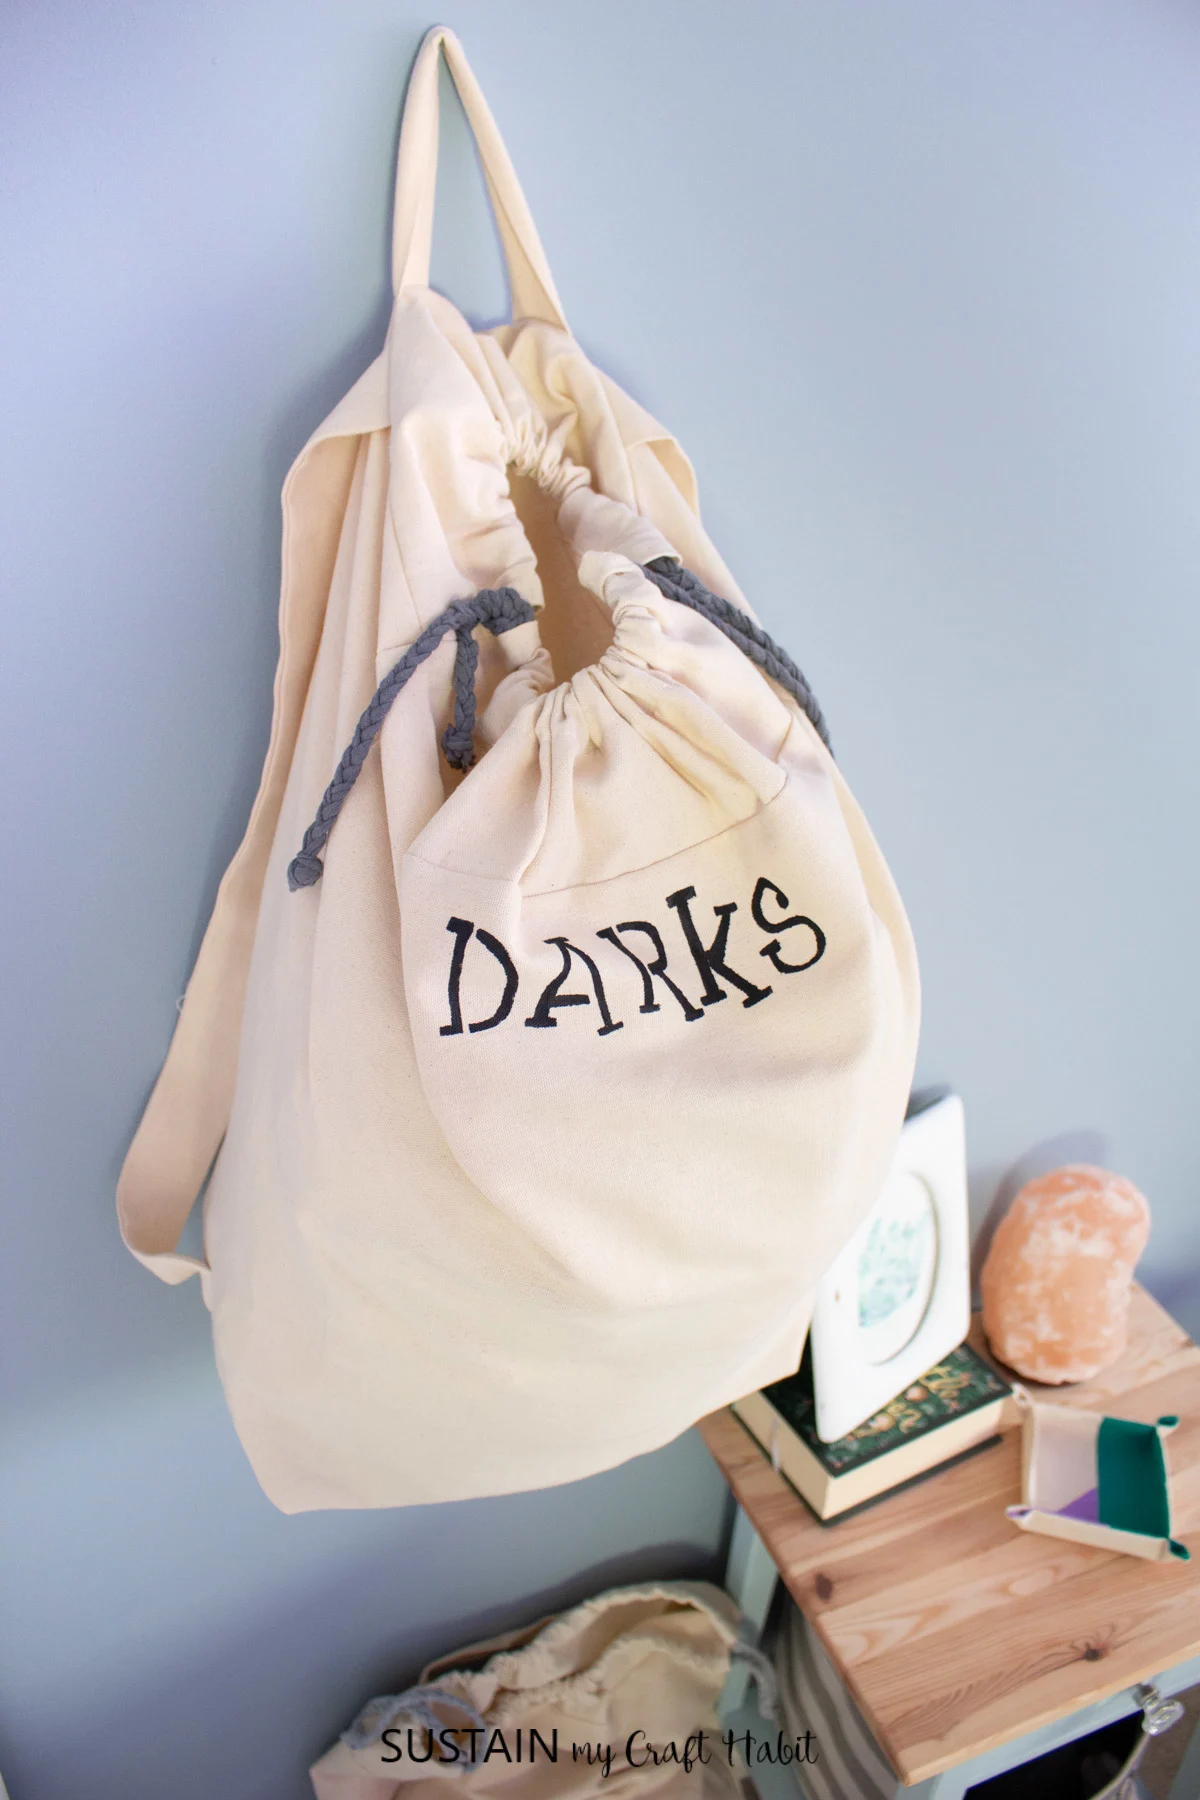 Laundry bag with the word "darks" hanging from the wall.